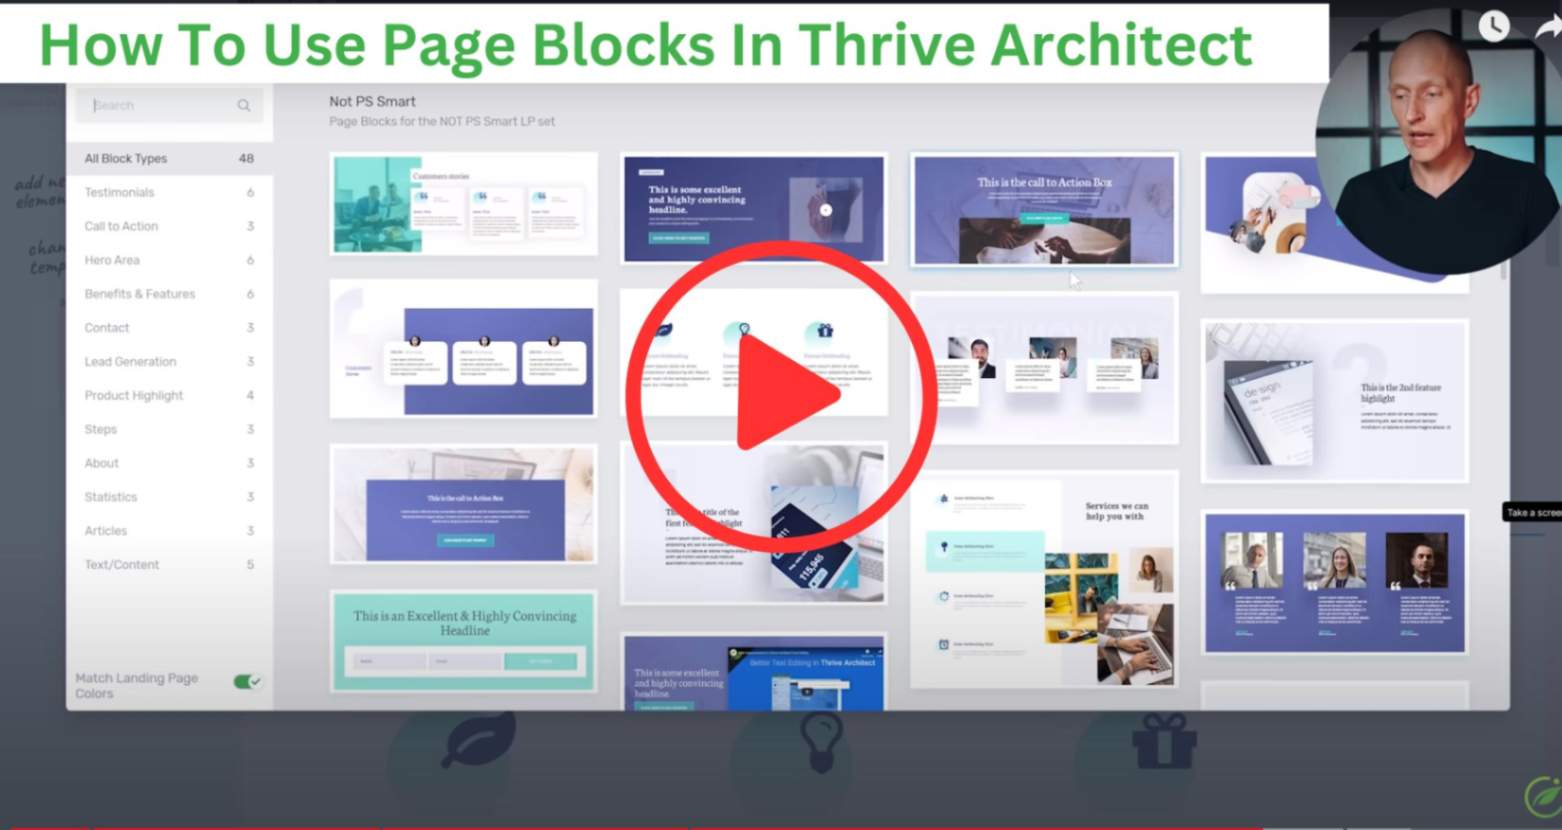 How To Use Page Blocks In Thrive Architect